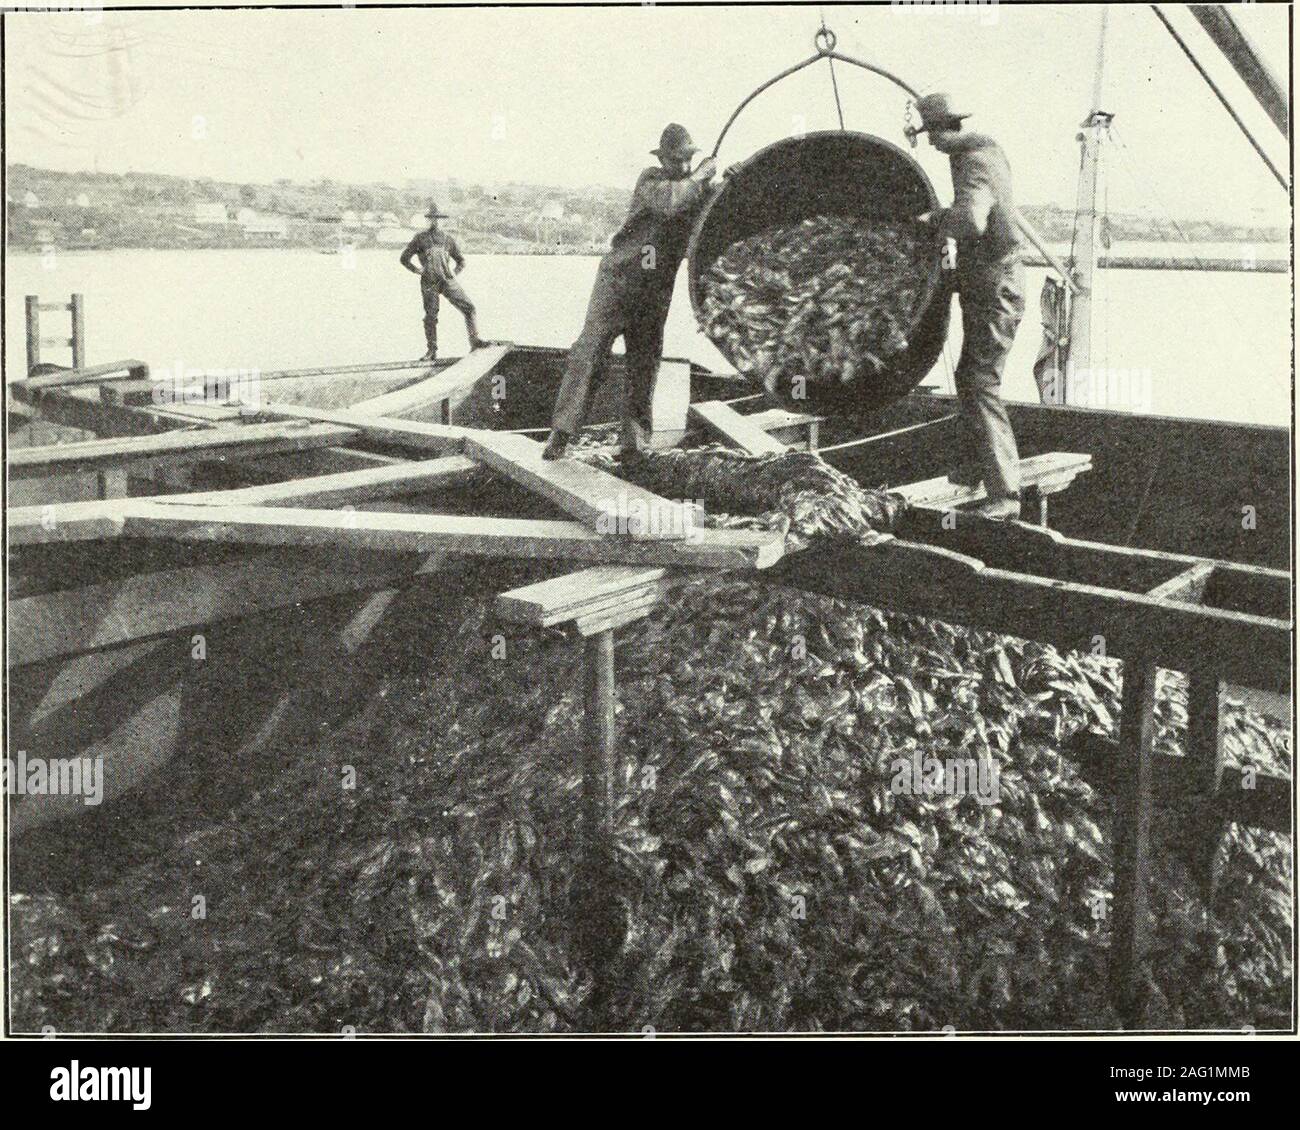 . Report of the Commissioner for the year ending June 30, 1902. ^ in pound nets, especiallyin those set in Gardiner Bay. They sell for 50 to 80 cents i^er 1,000,and two or three million are used each yanv. The sea-rol)in yields Report U. S. F. C. 1902, Plate 20.. DISCHARGING MENHADEN FROM VESSEL BY MEANS OF TUBS. Stock Photo